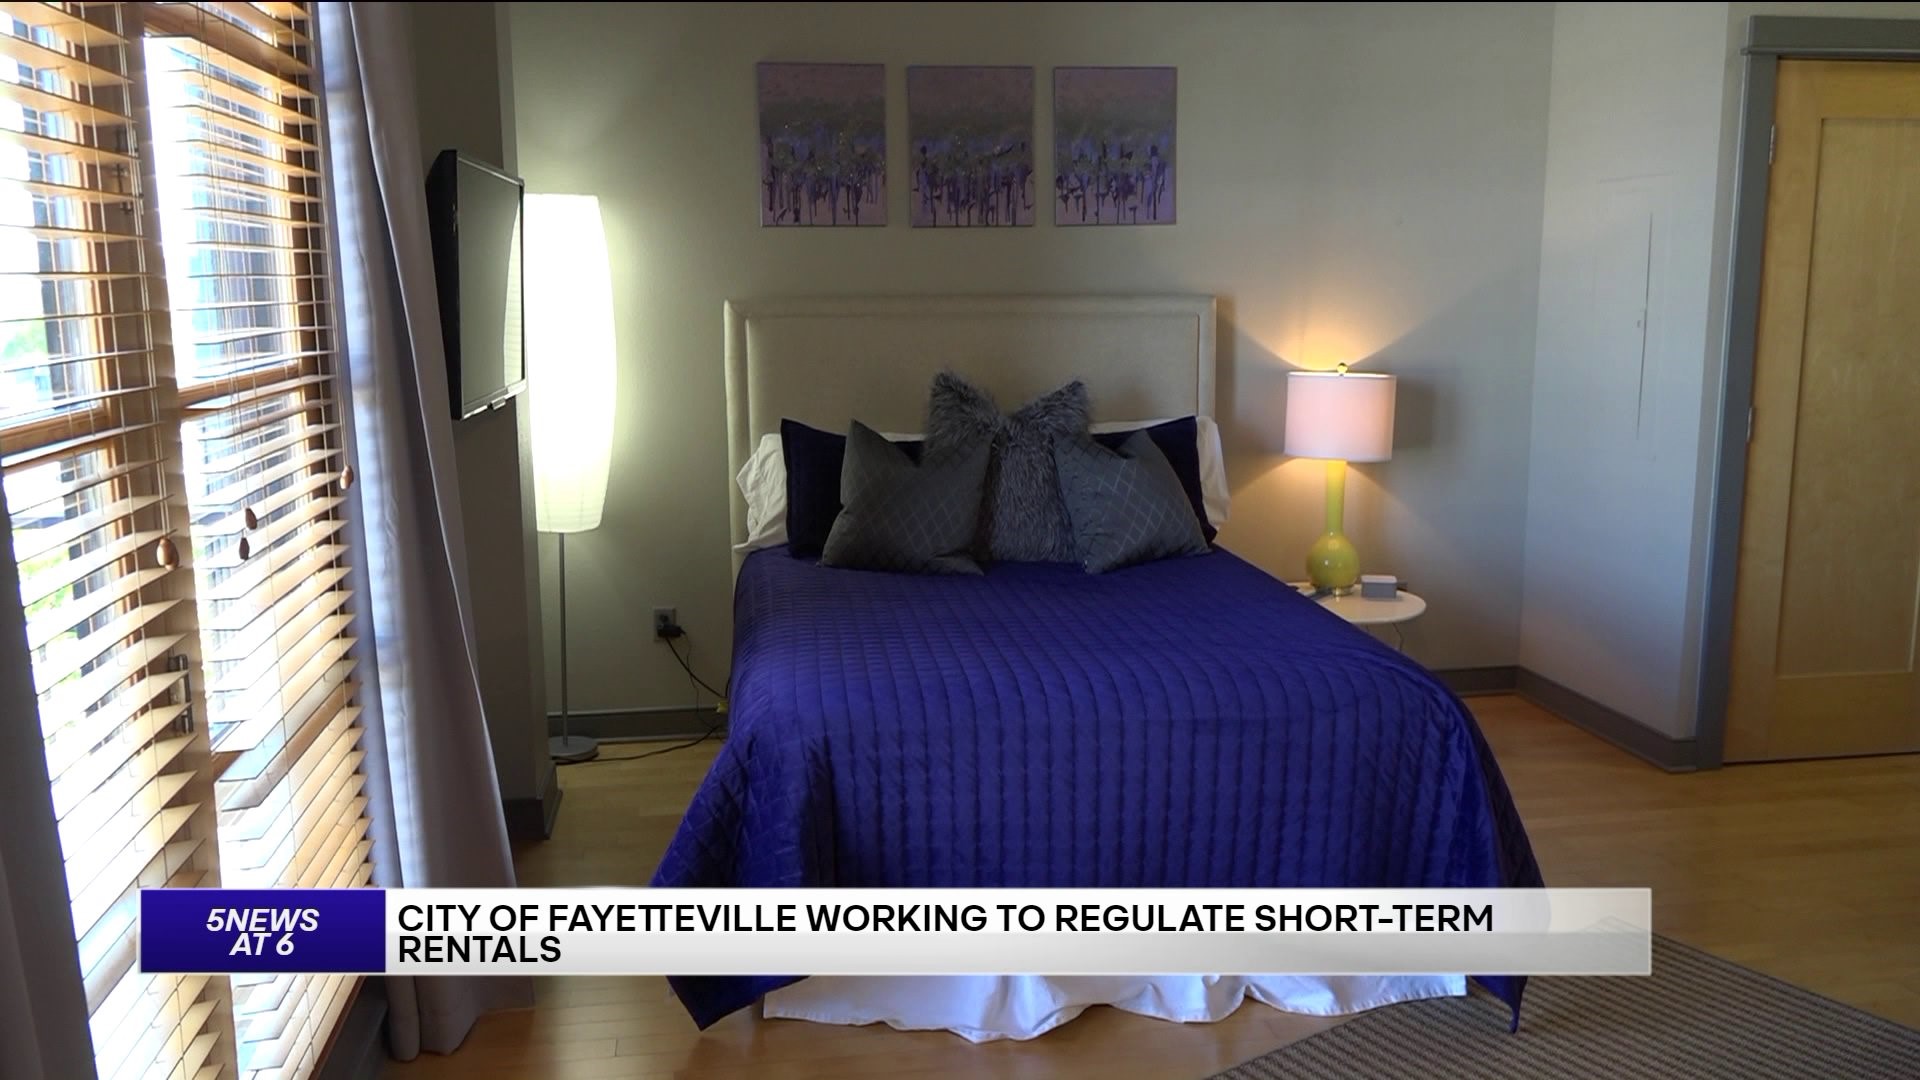 City of Fayetteville Working To Regulate Short-Term Home Rentals